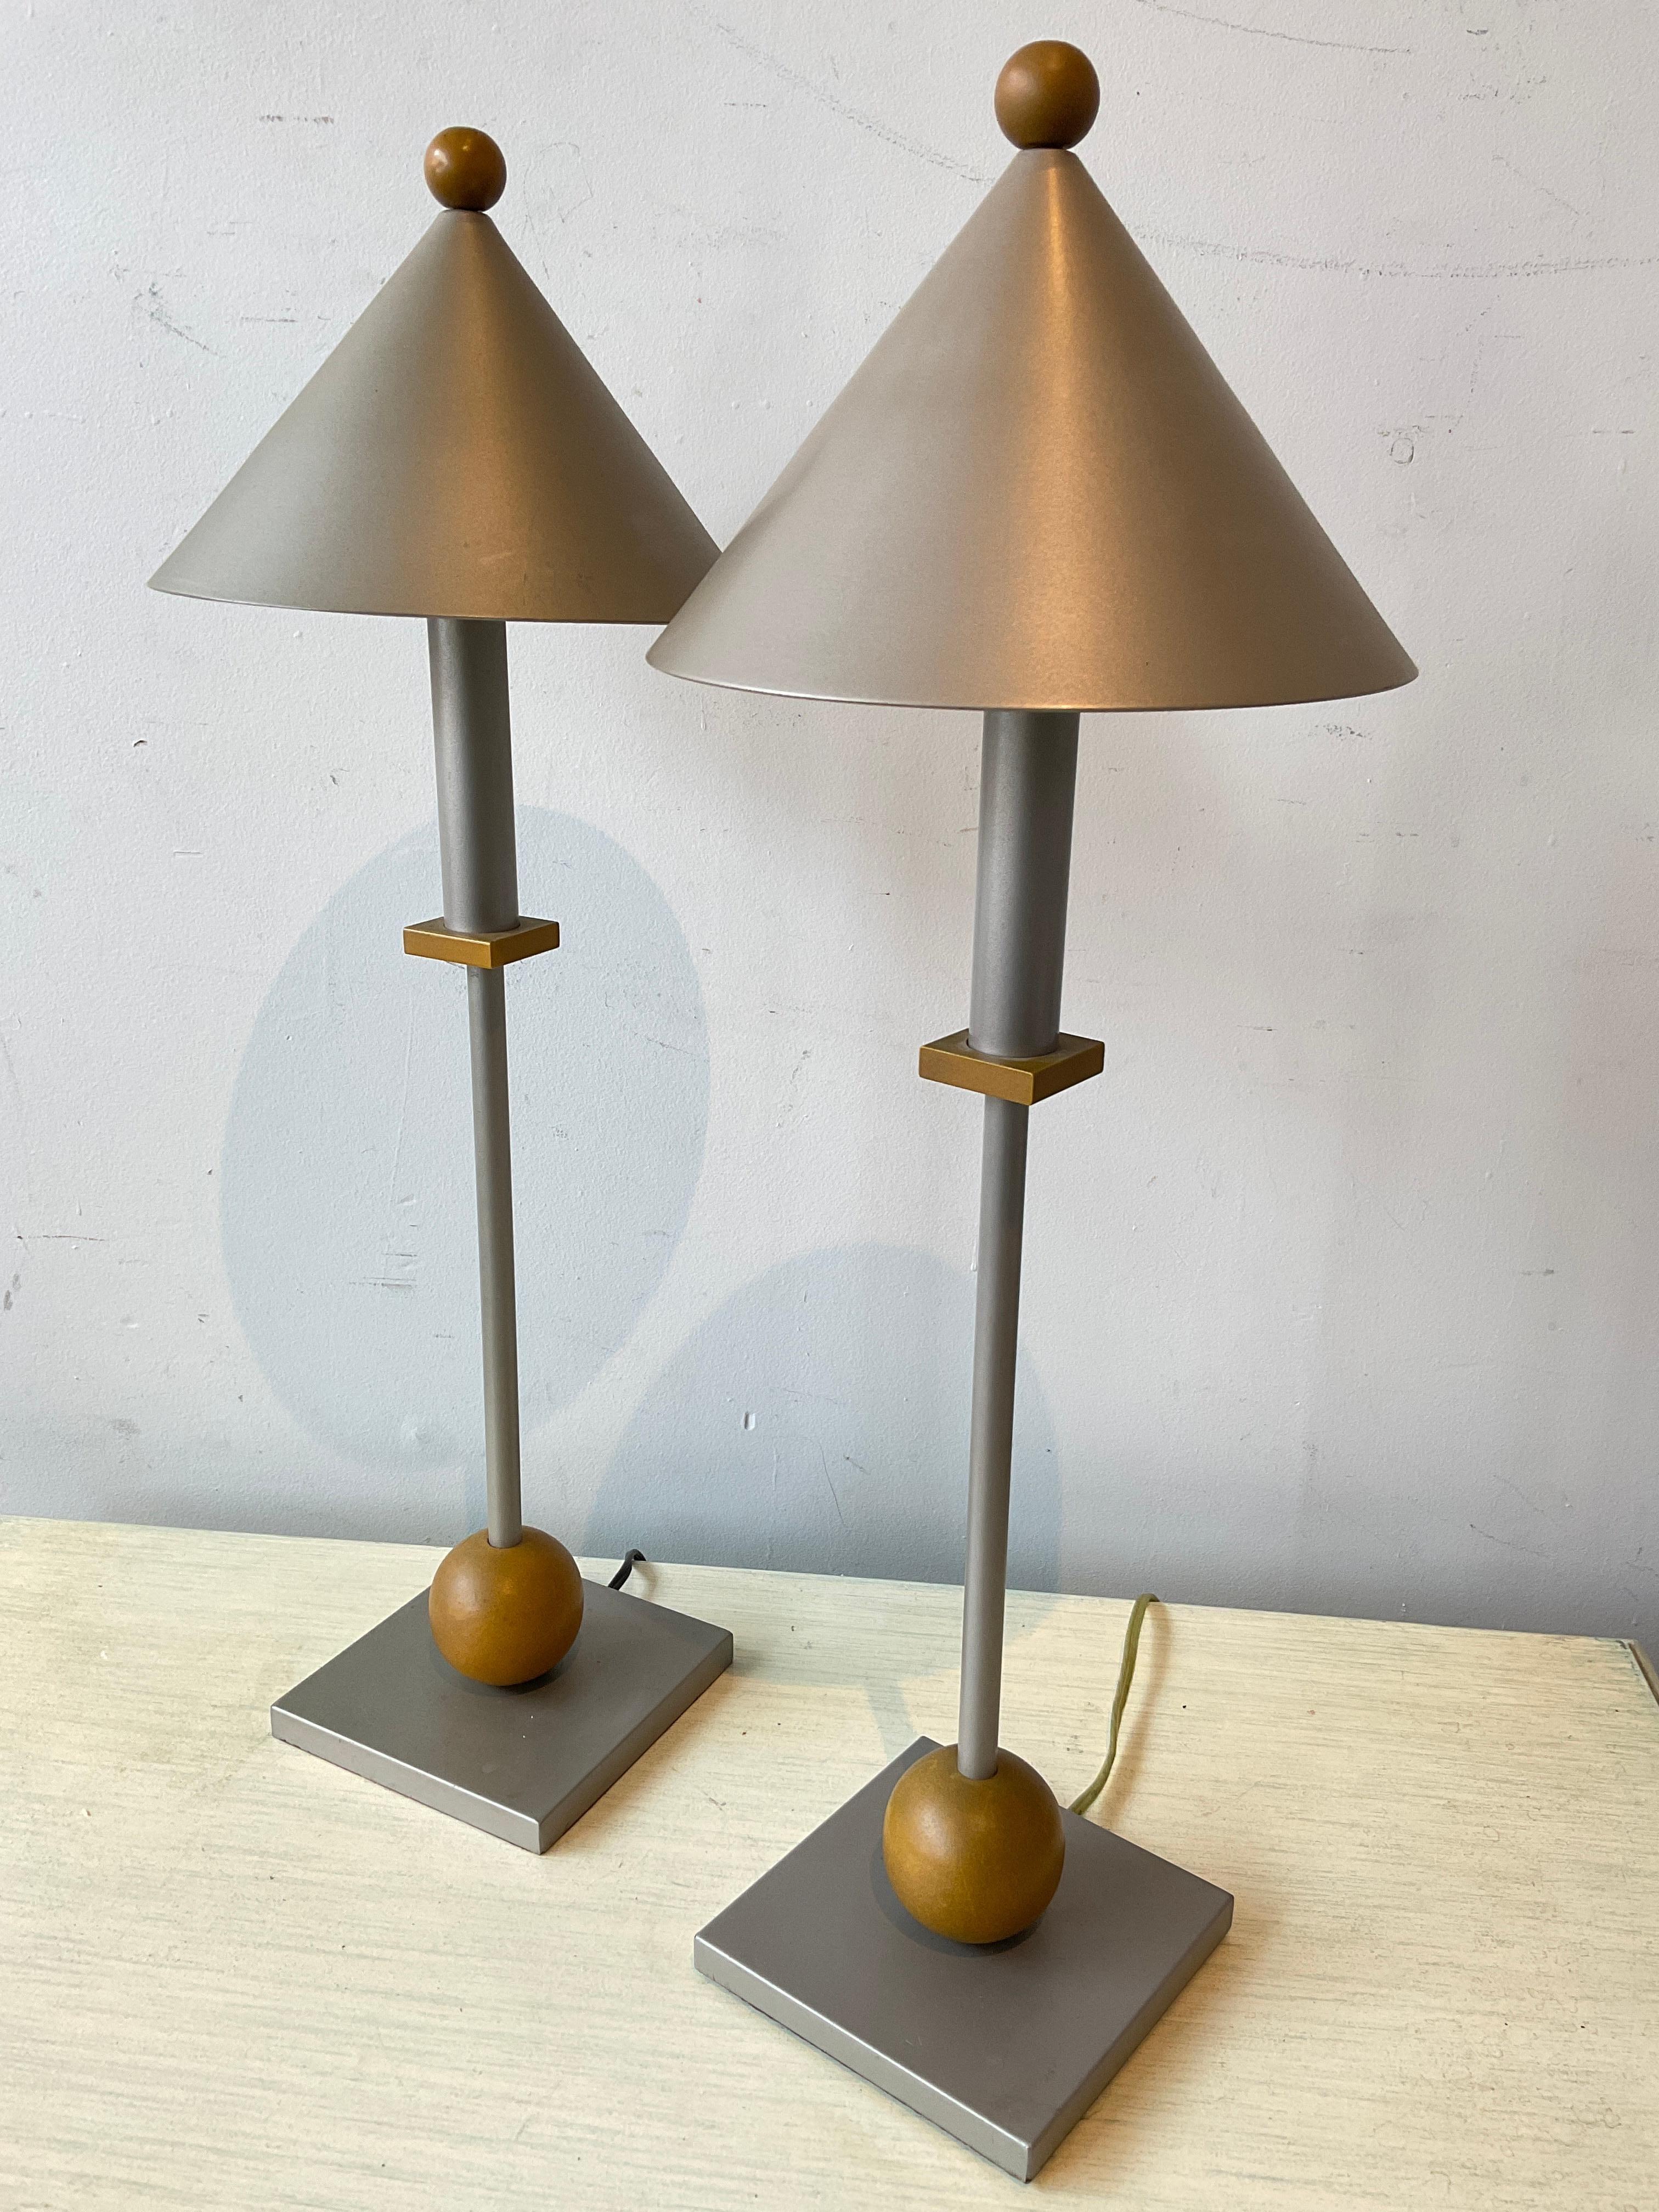 Pair of George Kovacs Memphis style small table lamps.
Original wiring, needs rewiring.